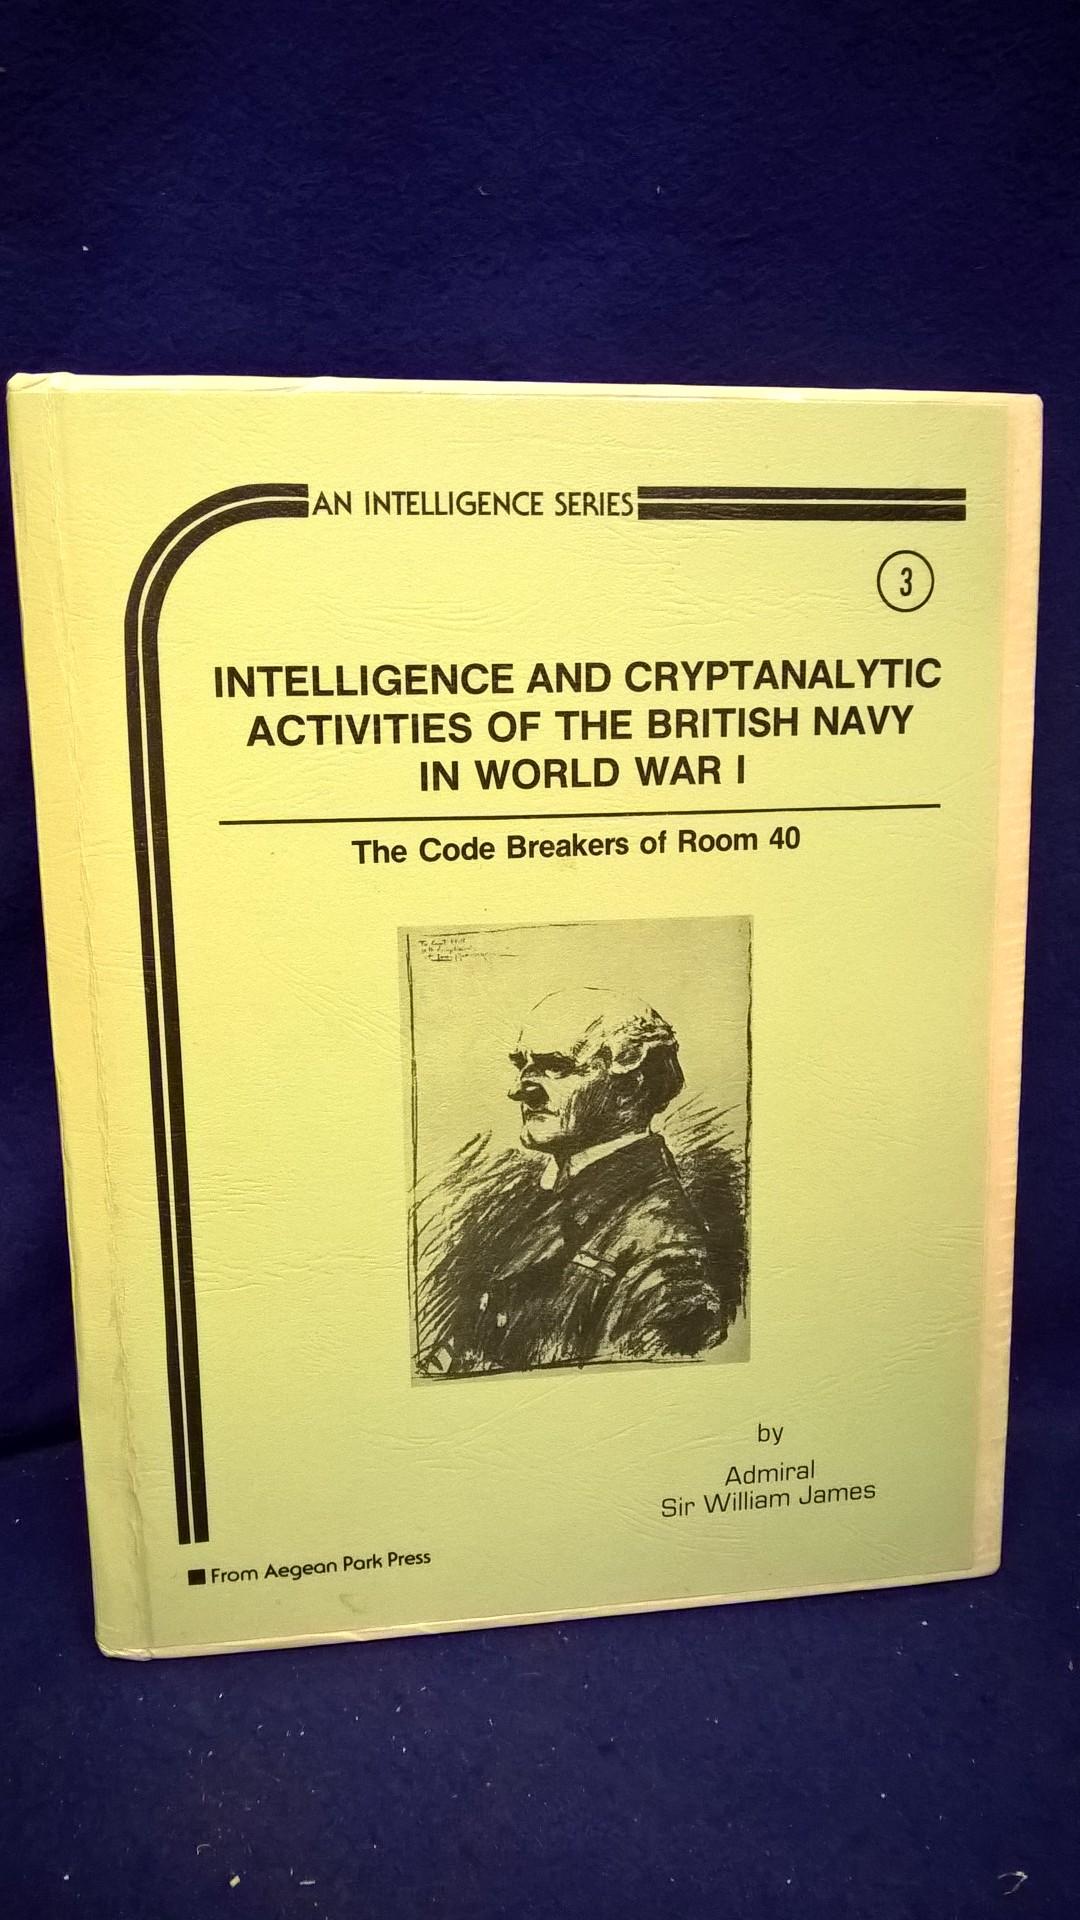 Intelligence and Cryptanalytic activities of the British Navy in World War I. The Code Breakers of Room 40